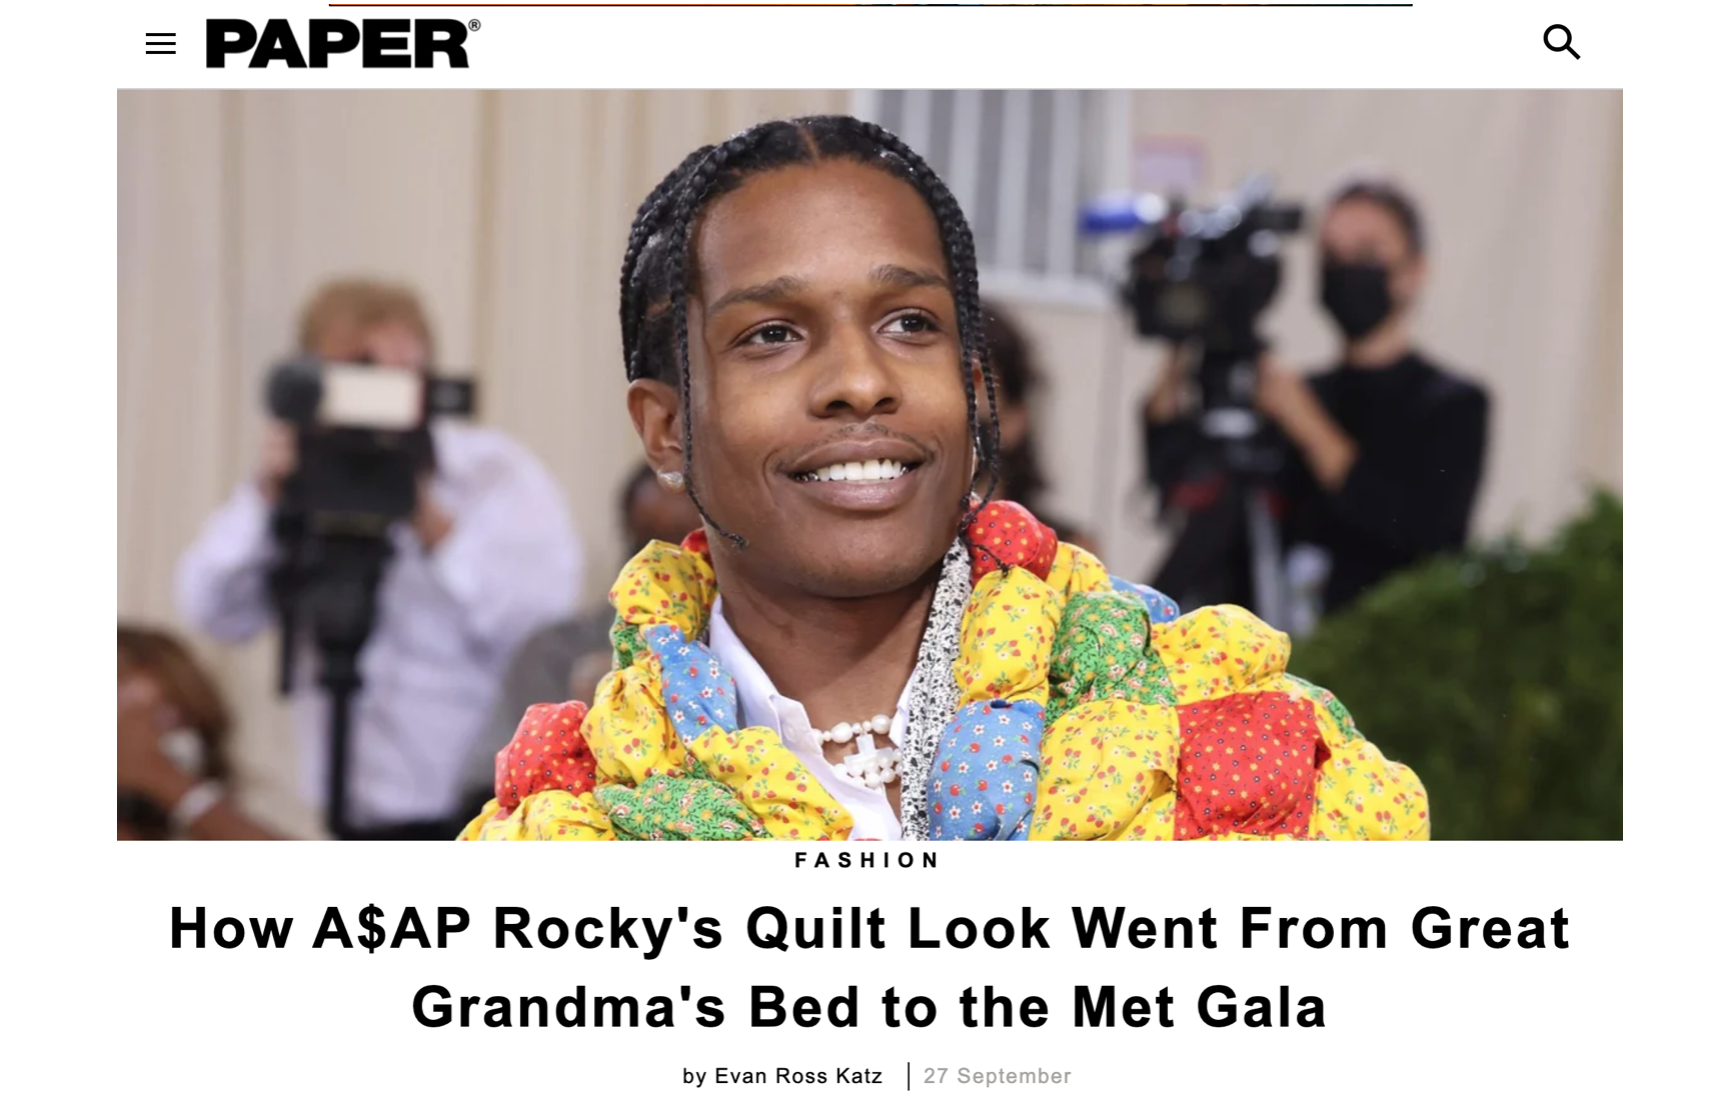 Screen grab image of Paper article featuring A$AP Rocky from the shoulders up, at the met gala in 2021, wearing a colorful quilt garment. The headline reads 